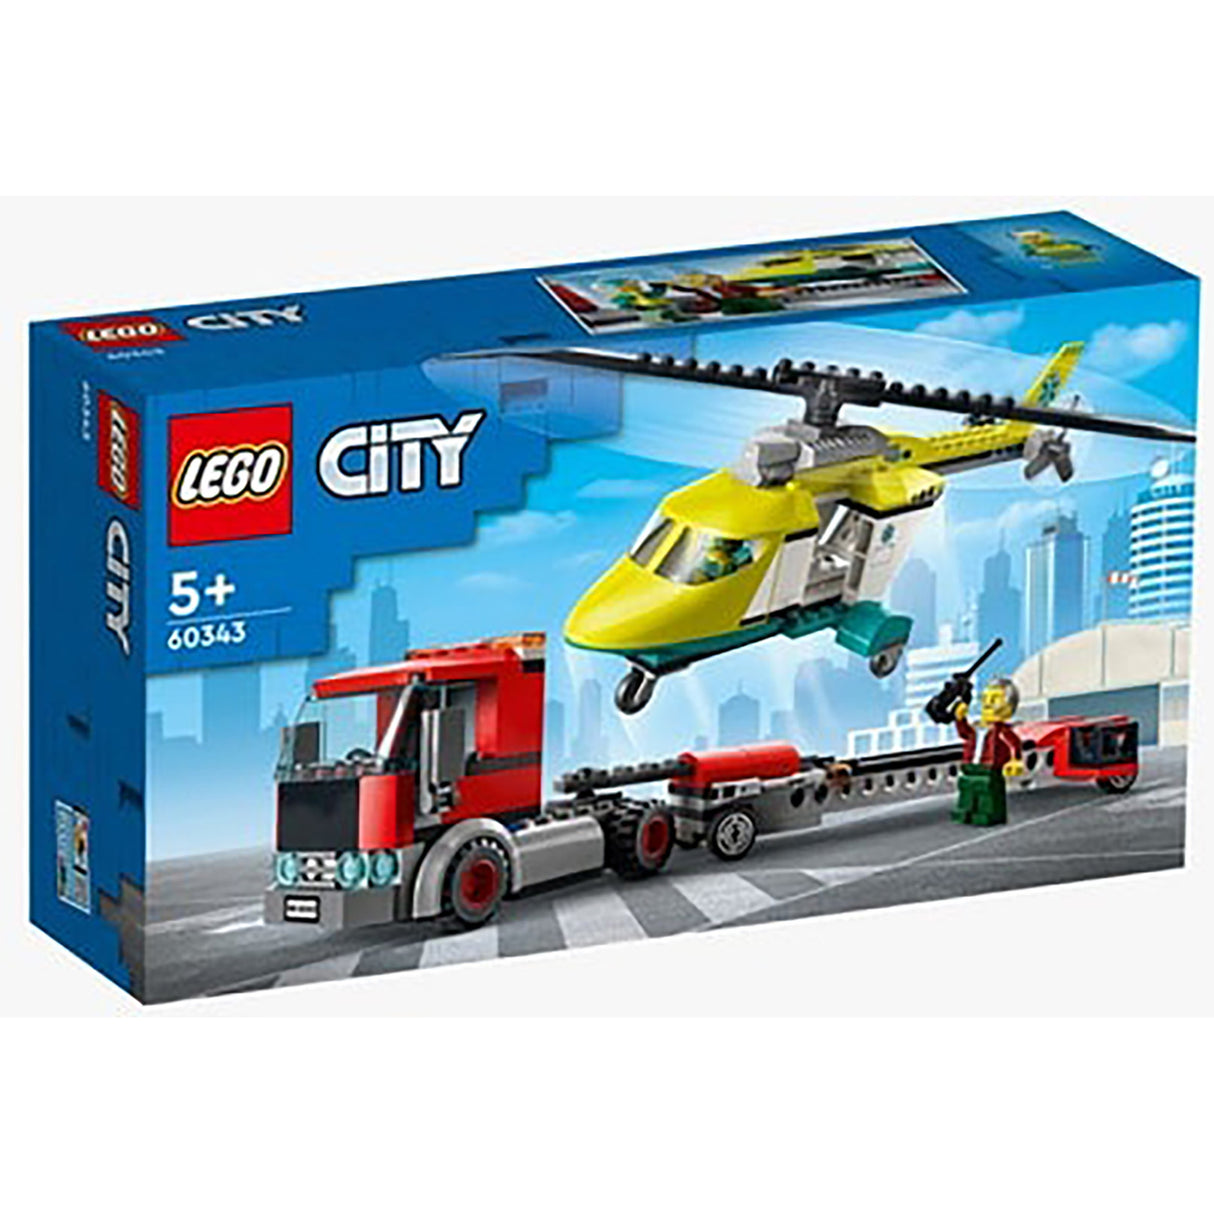 LEGO 60343 City Rescue Helicopter Transport Toy Building Kit Collectable Set